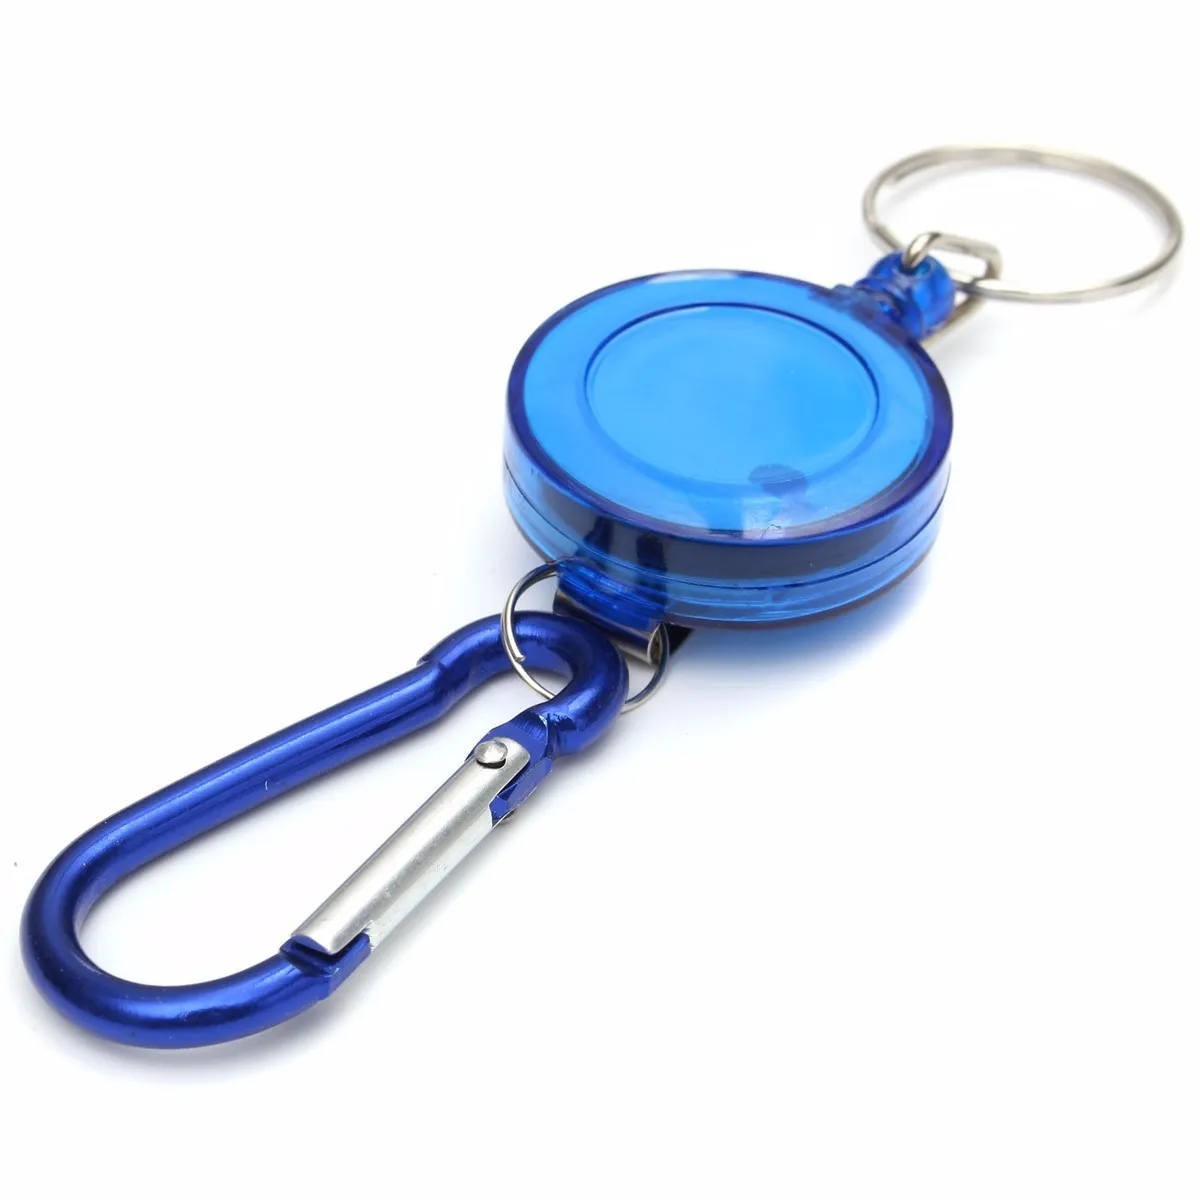 Retractable Reel Recoil ID Keychains Badge Lanyard Name Tag Key Card Holder Belt Clips keyring246Y